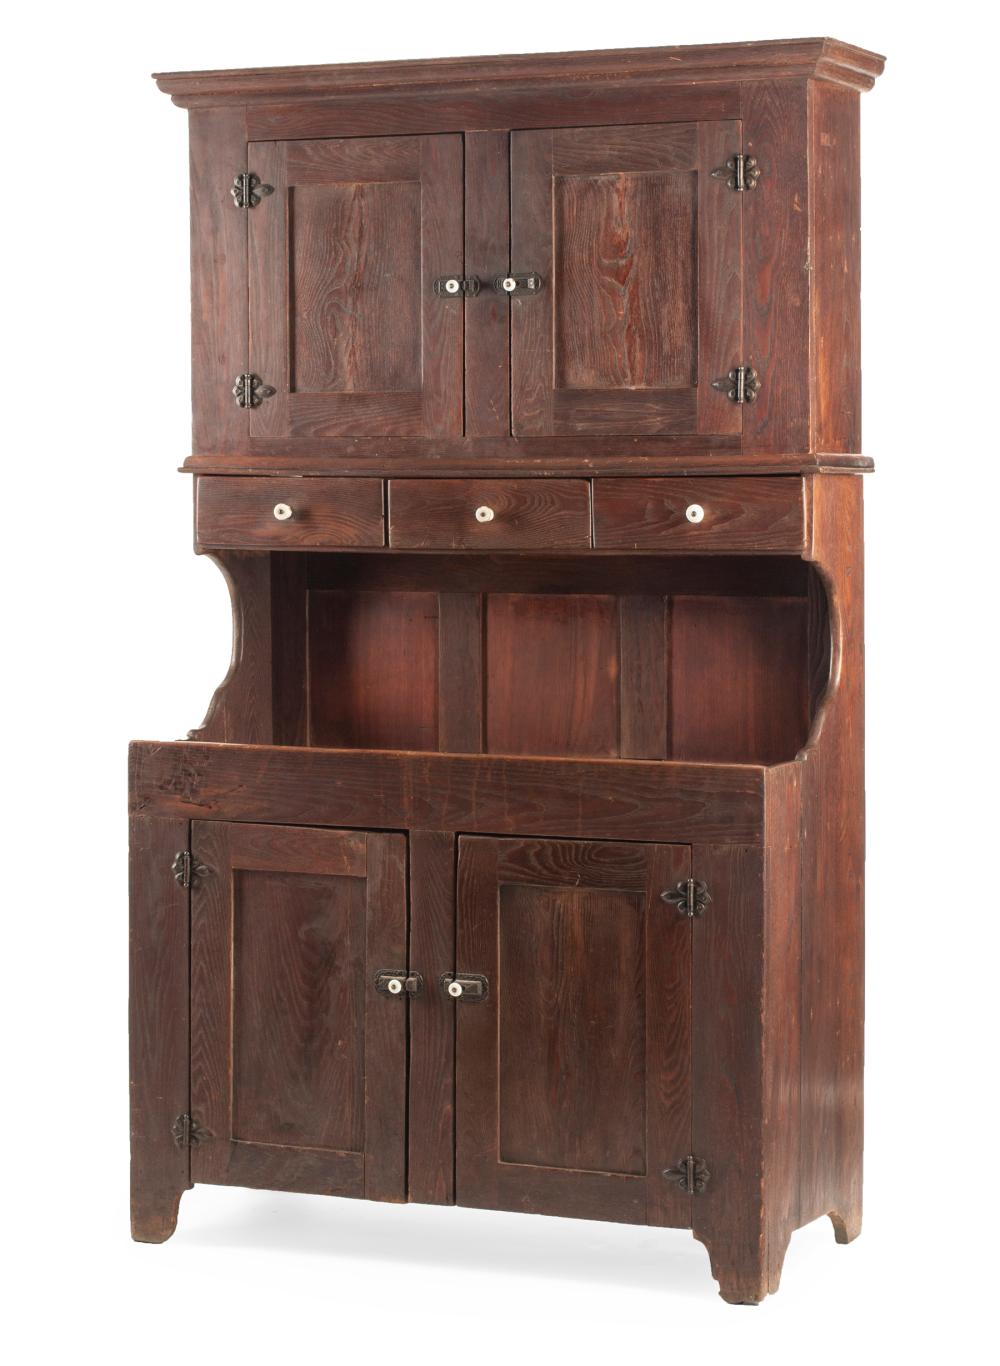 AMERICAN SOUTHERN MIXED WOODS DRY SINK 2e34c3